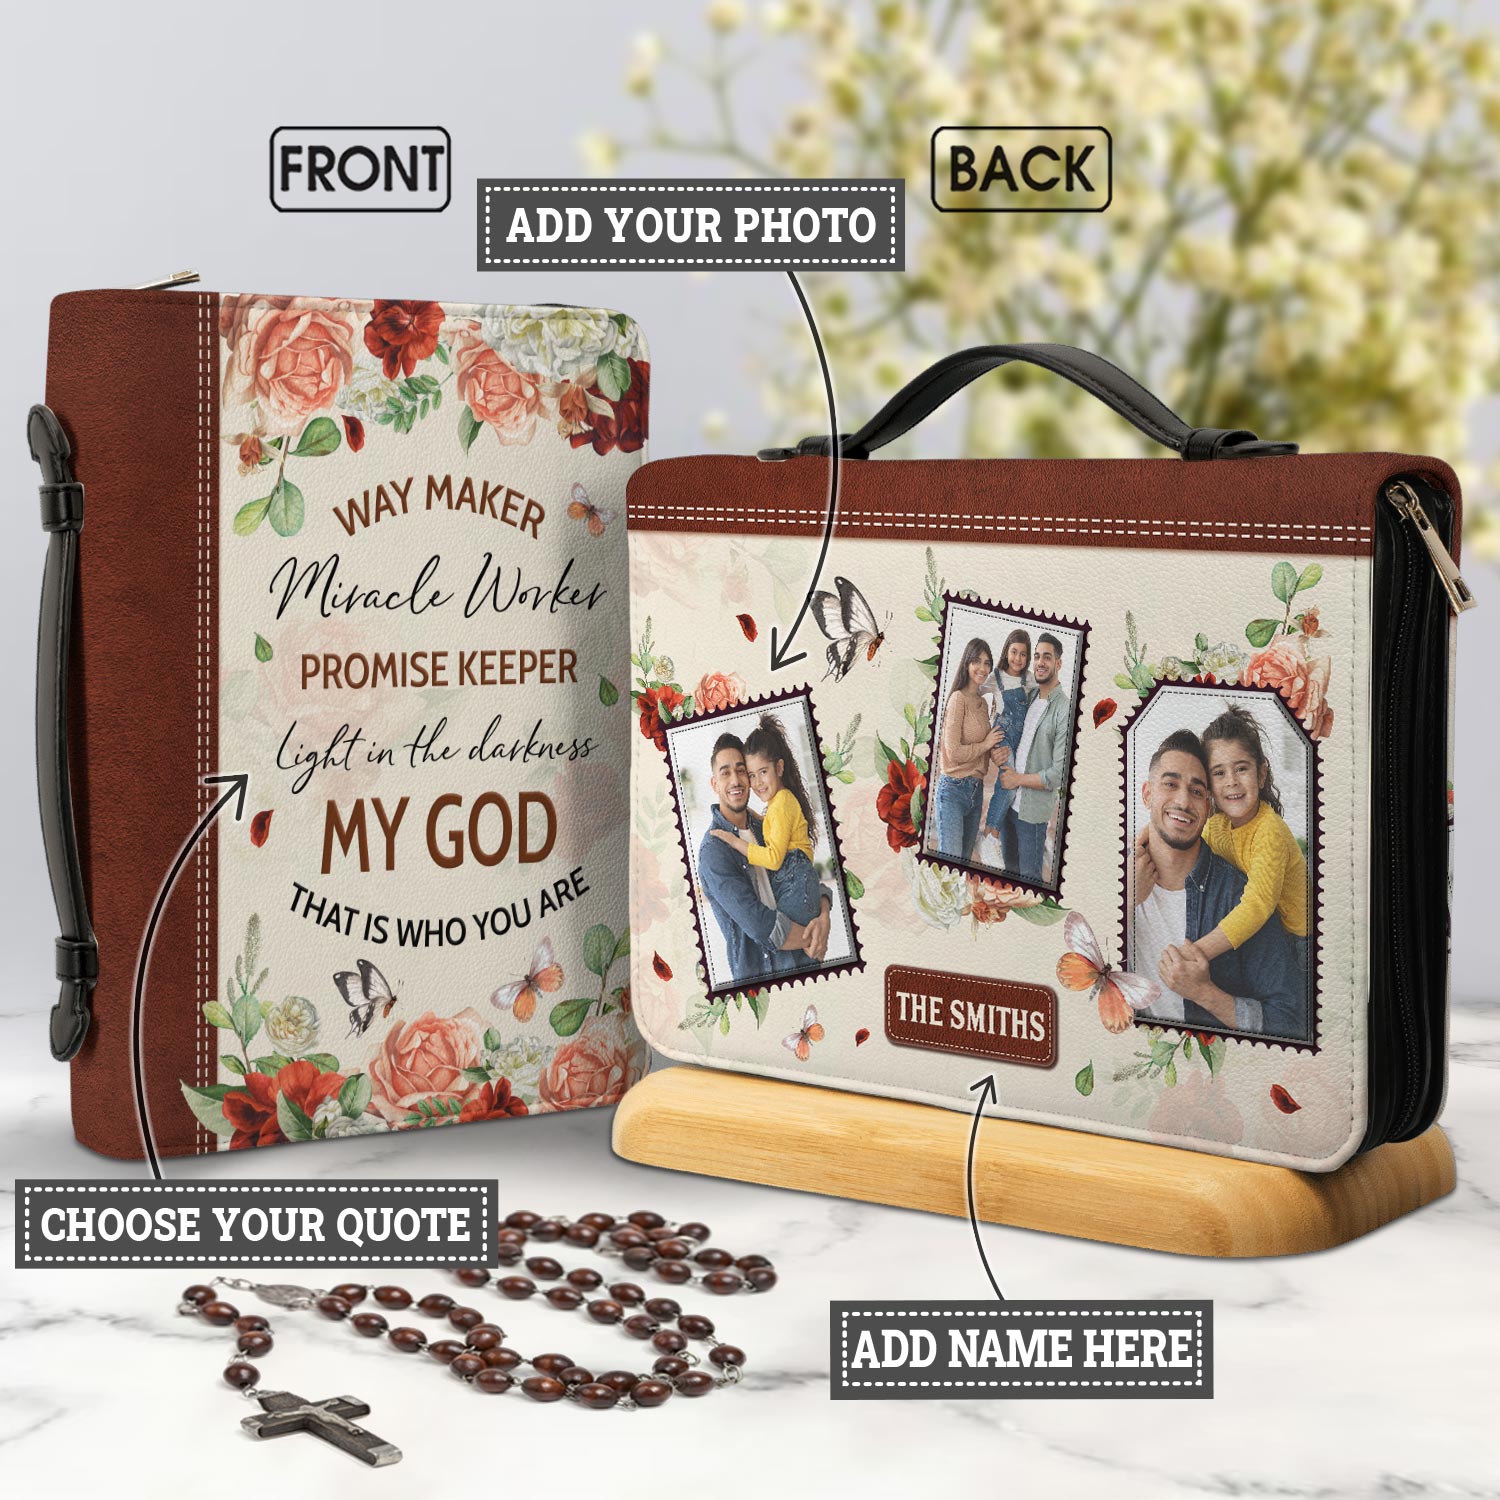 Way Maker Miracle Worker TTRZ0111004Y Bible Cover - Godly Bible